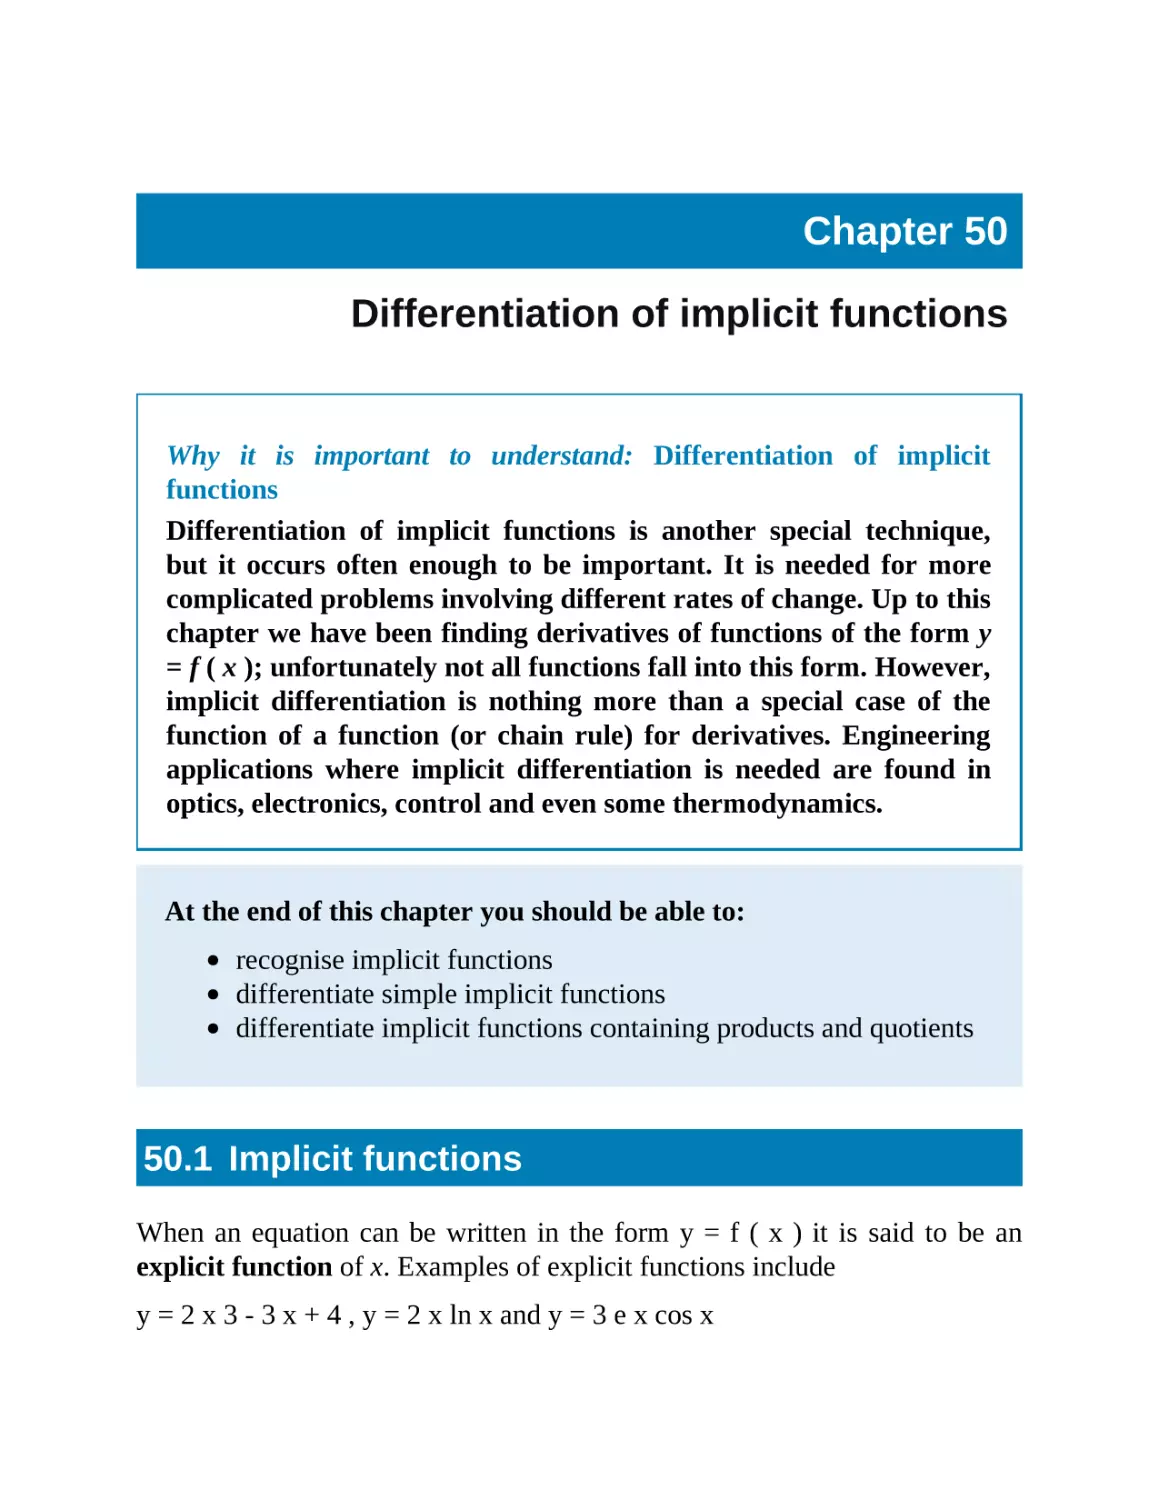 50 Differentiation of implicit functions
50.1 Implicit functions